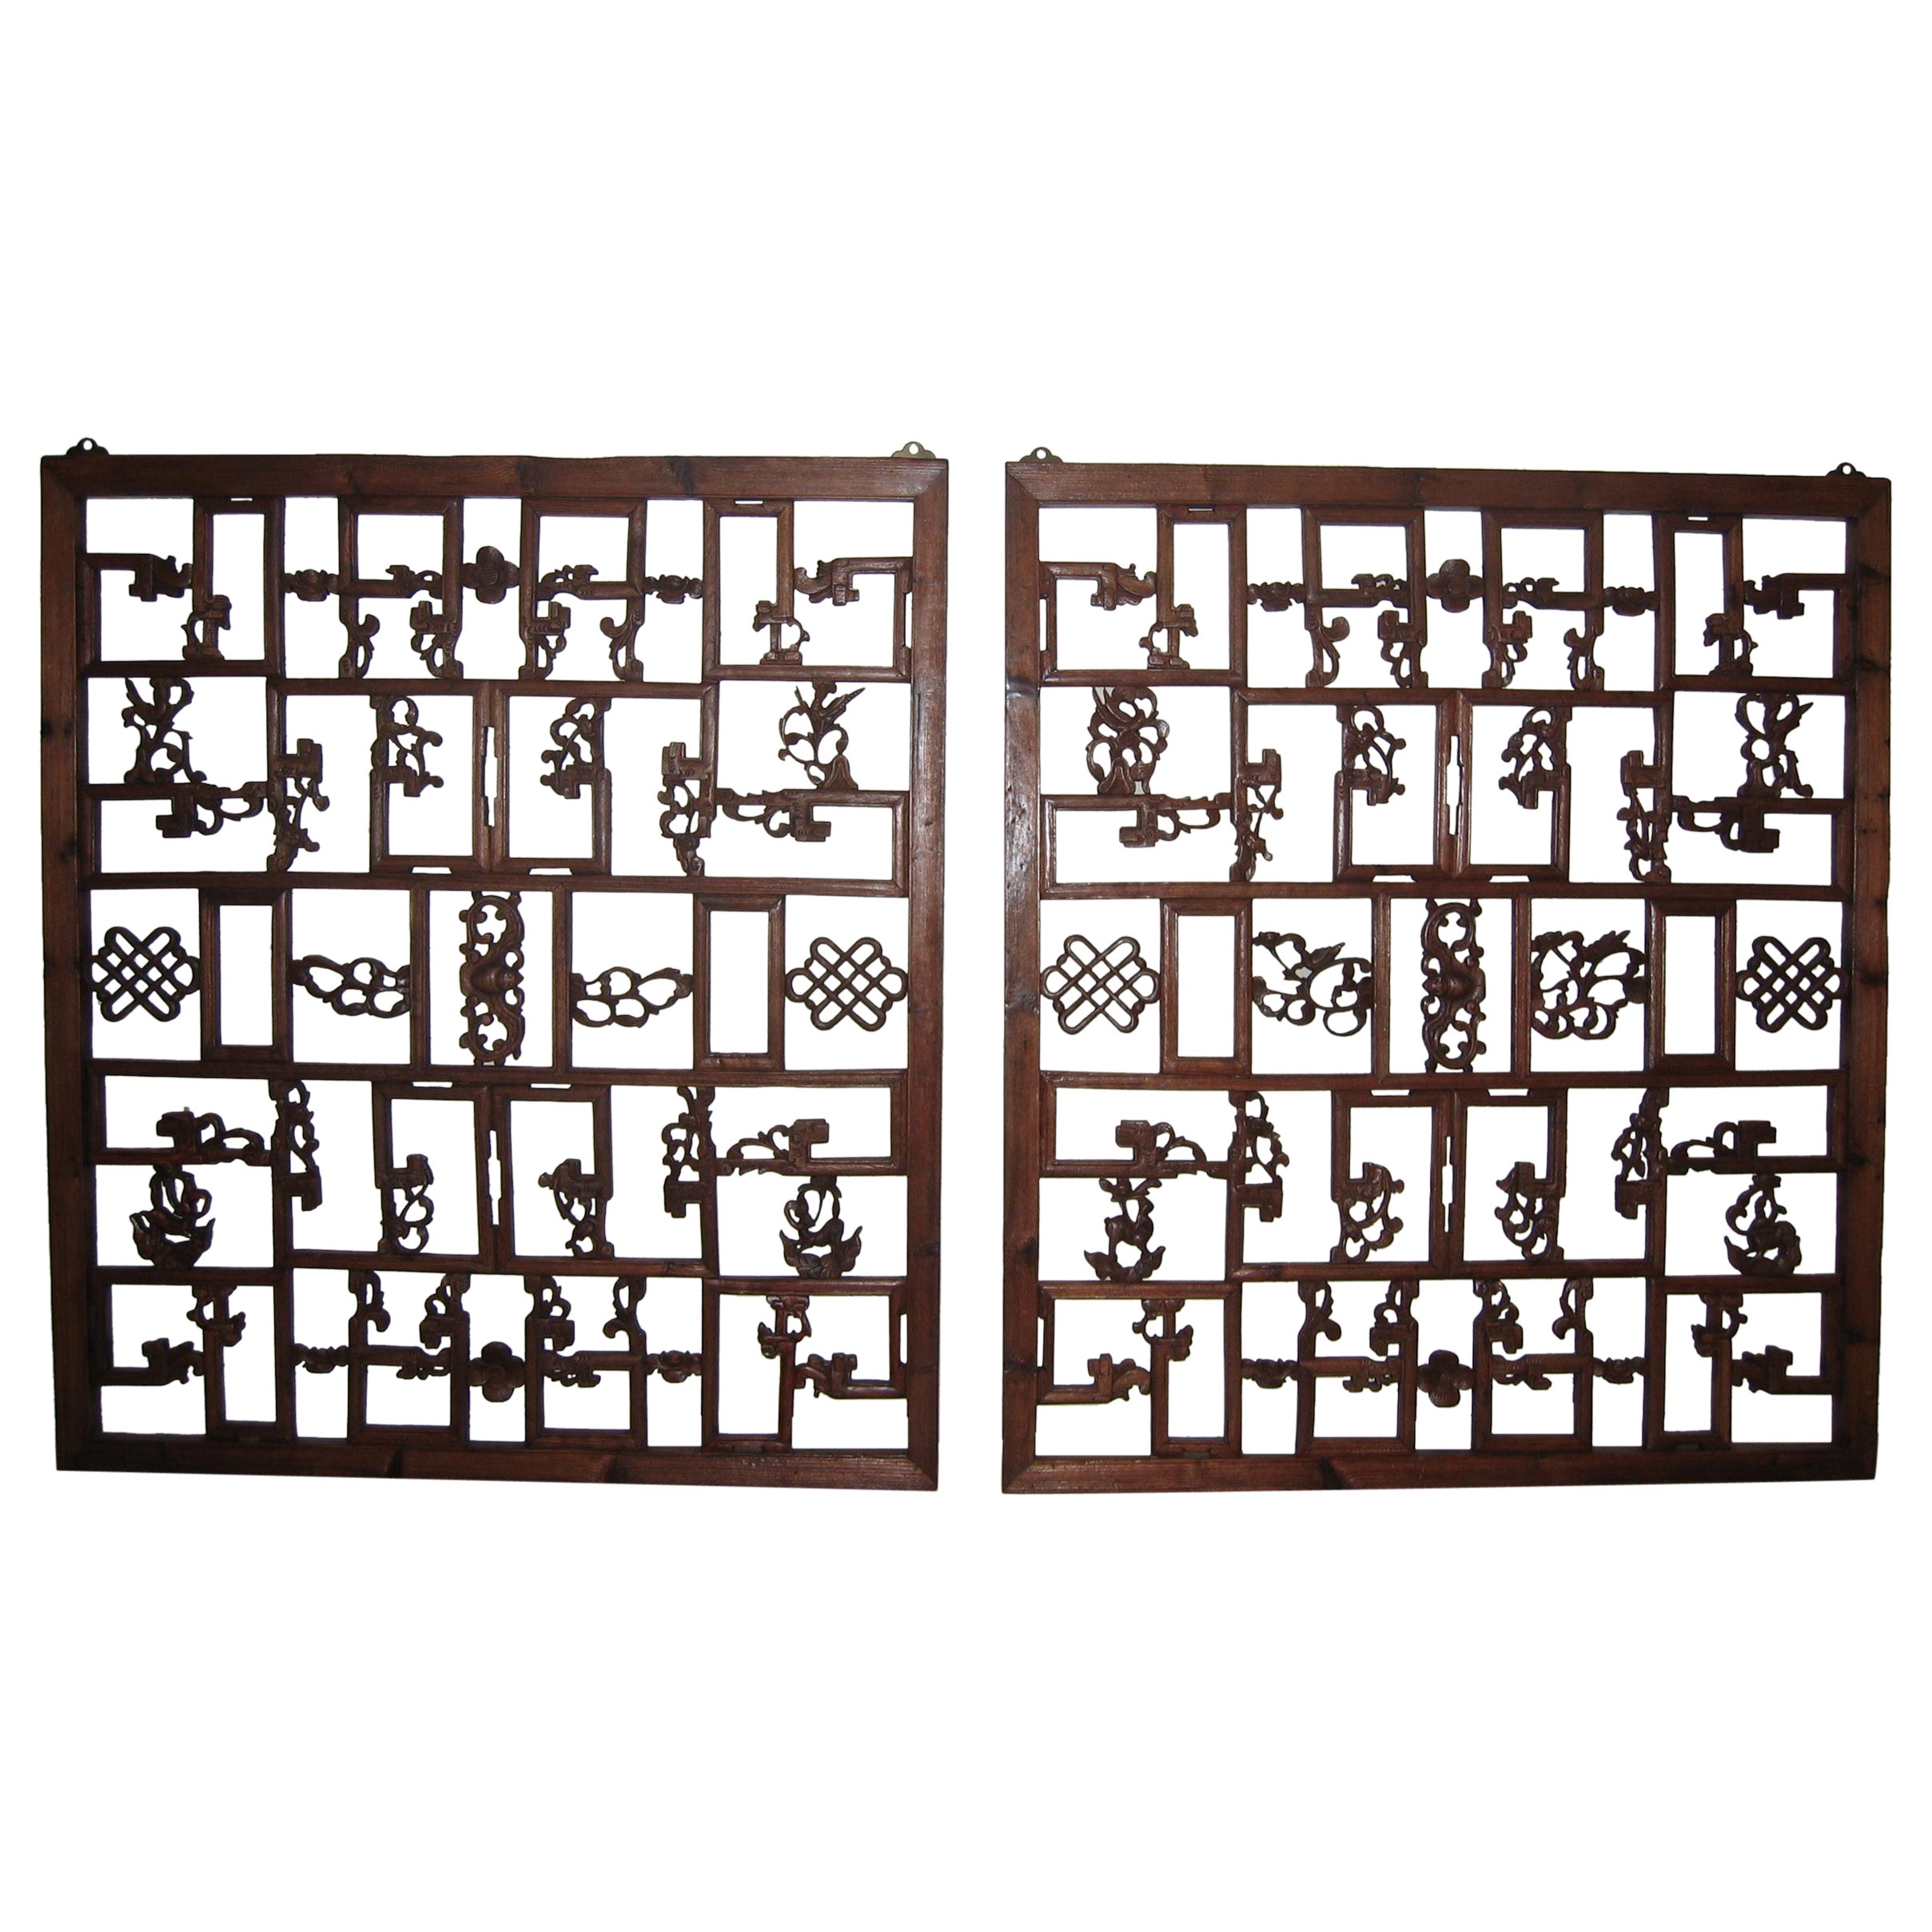 Pair of Intricately Carved Window Screens - 19th Century